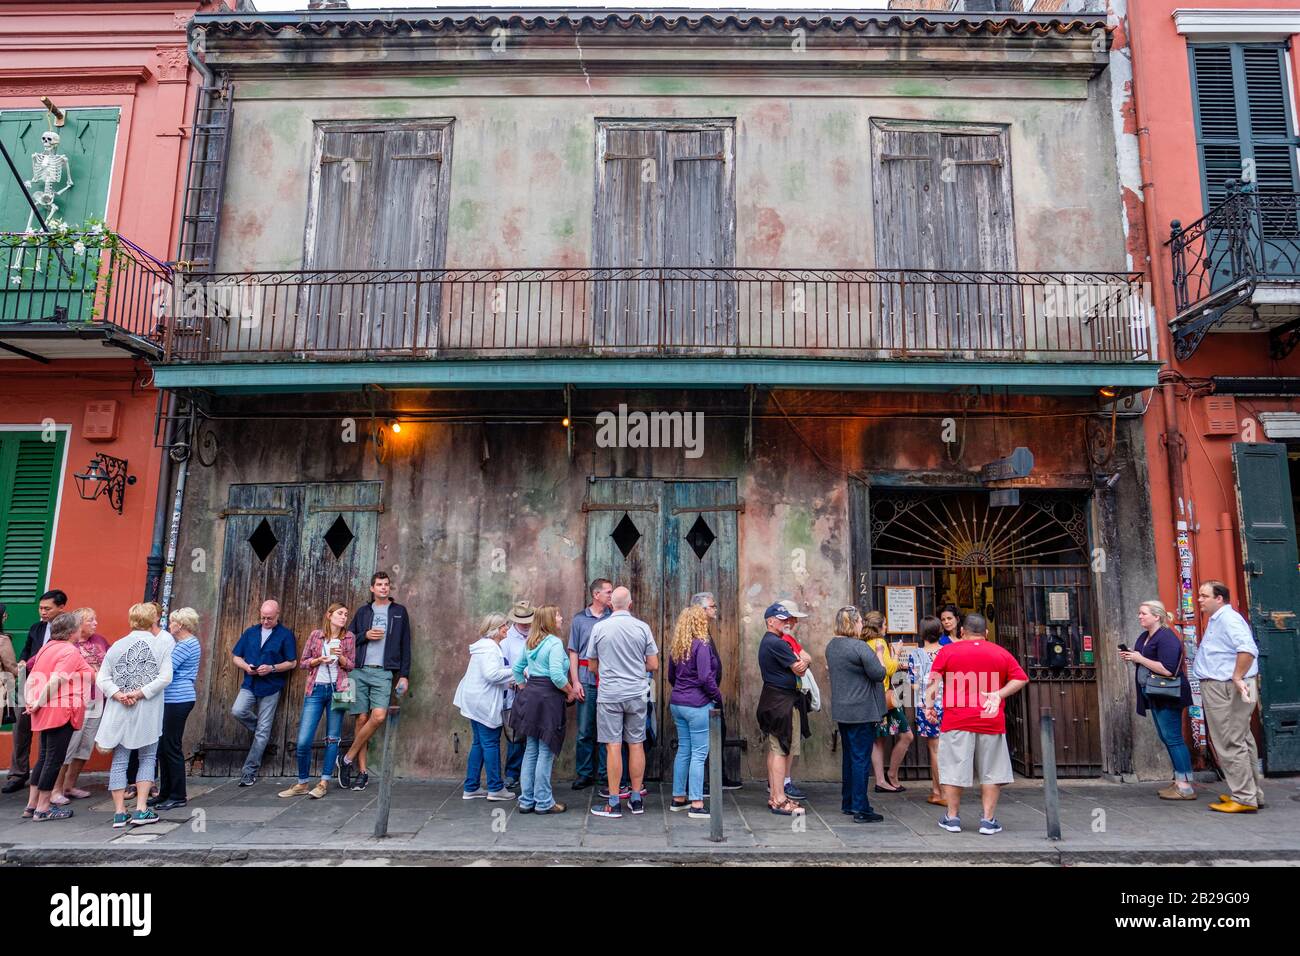 People waiting in line outside Preservation Hall jazz music venue, New Orleans, Louisiana, USA Stock Photo